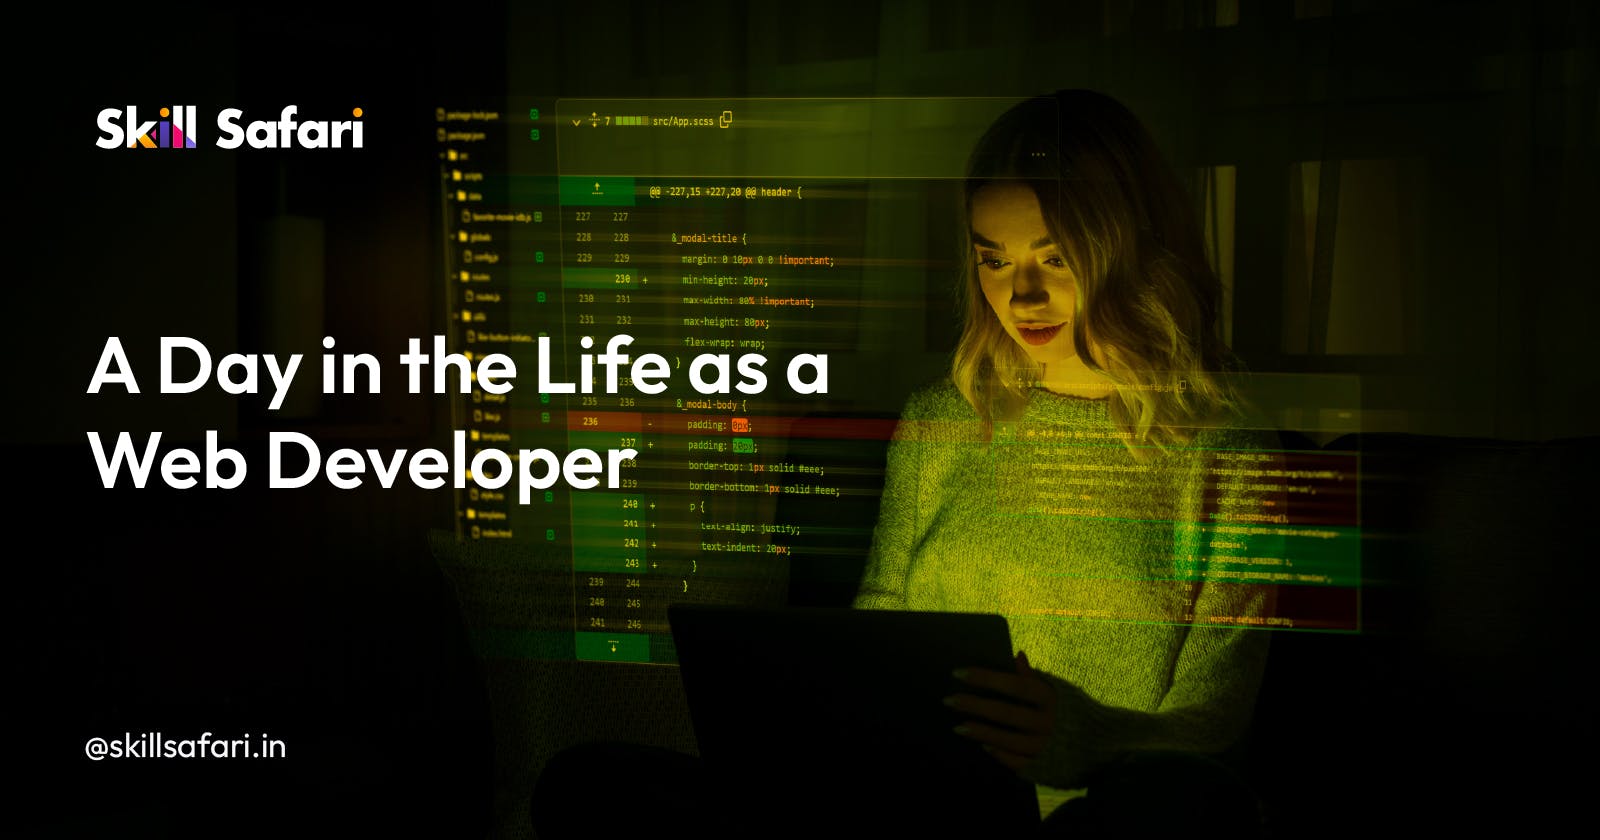 A Day in the Life as a Web Developer